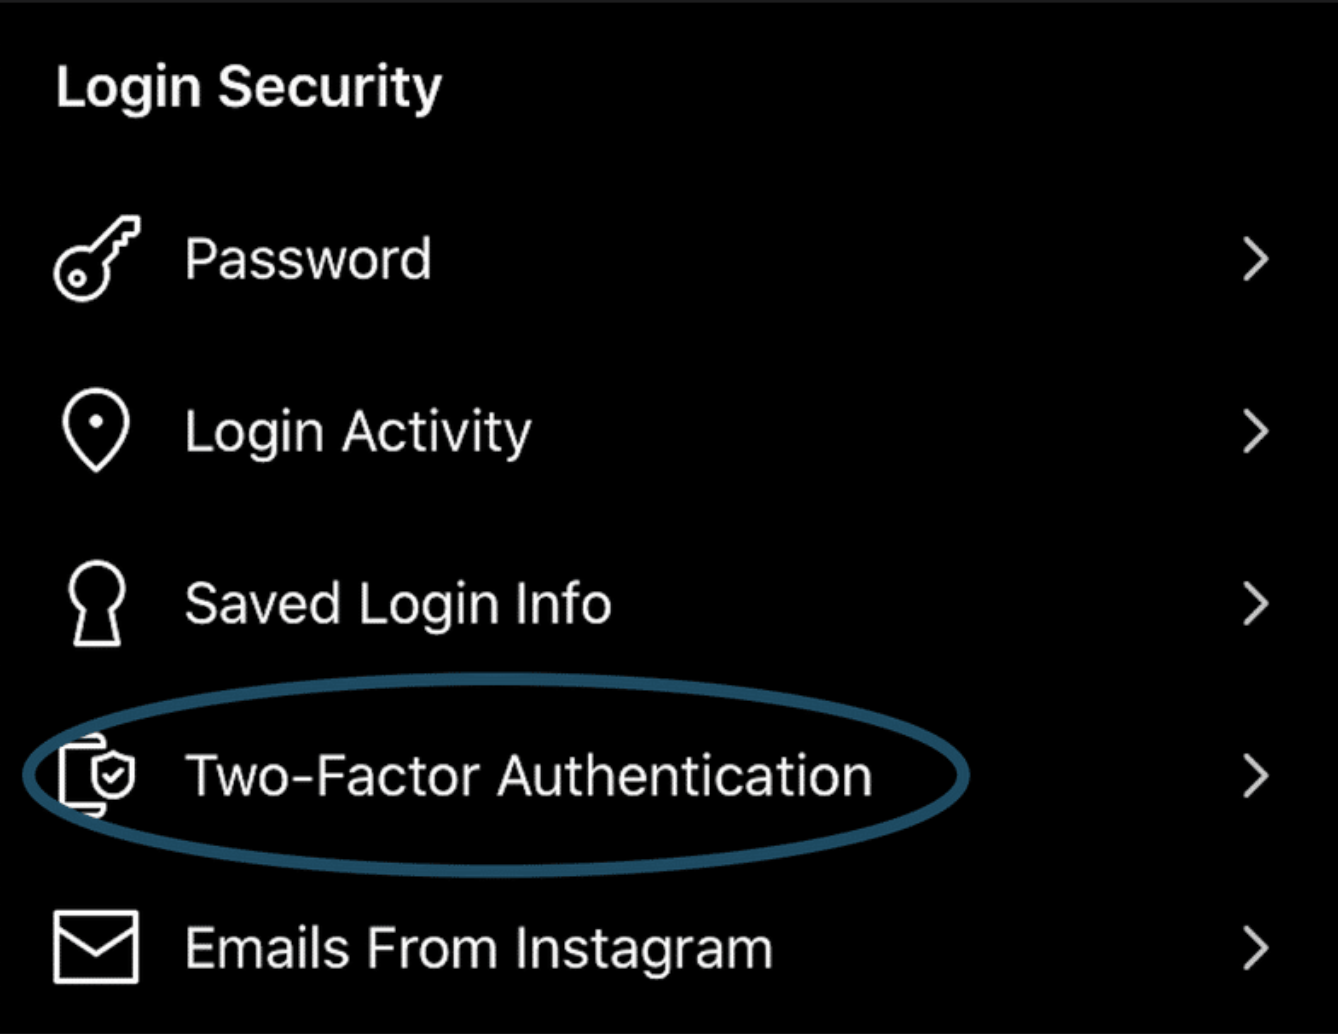 How to setup Multi-Factor Authentication on Instagram